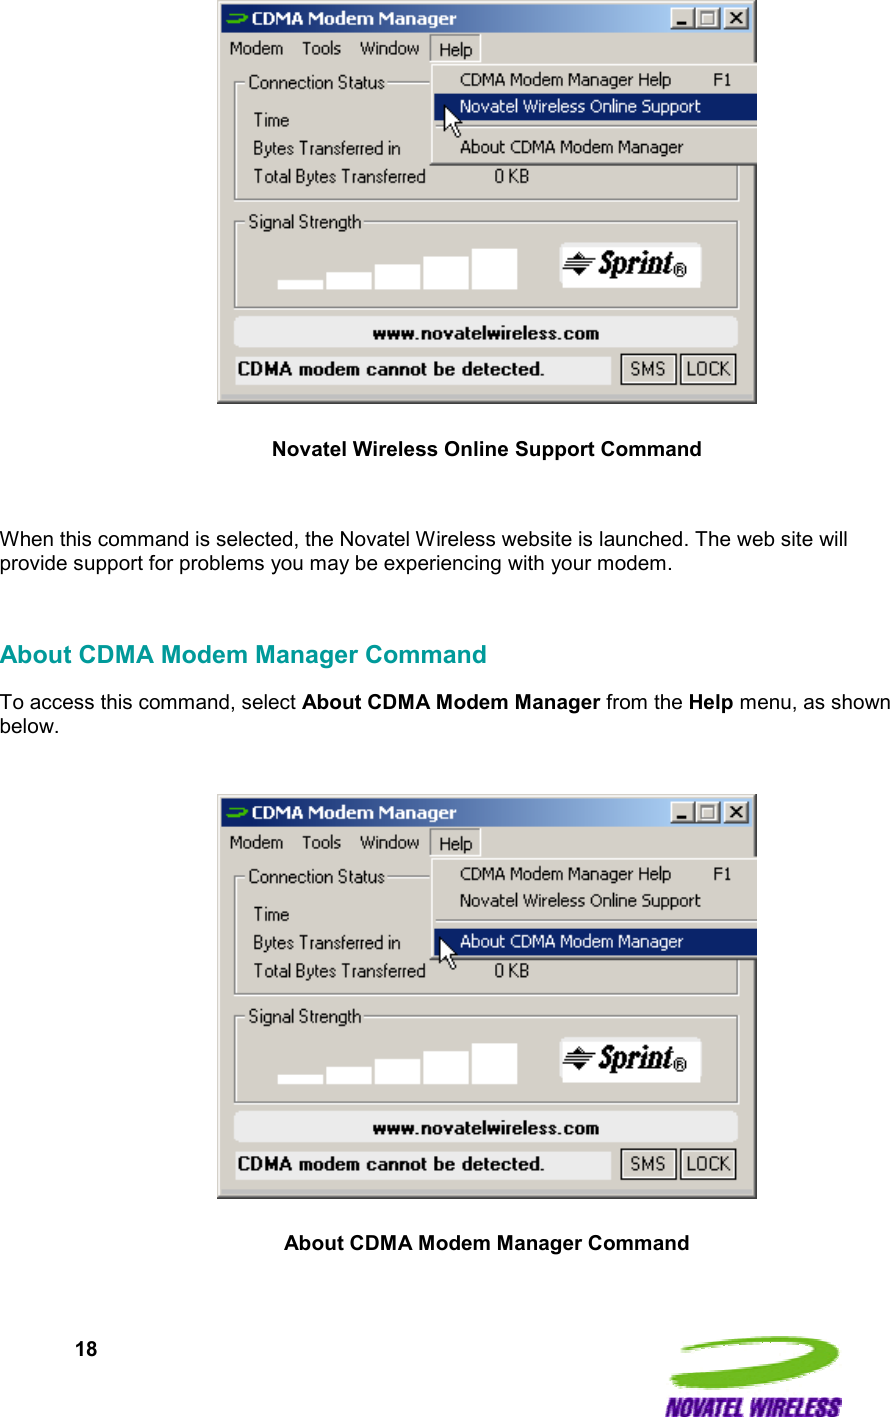  18   Novatel Wireless Online Support Command  When this command is selected, the Novatel Wireless website is launched. The web site will provide support for problems you may be experiencing with your modem.  About CDMA Modem Manager Command To access this command, select About CDMA Modem Manager from the Help menu, as shown below.    About CDMA Modem Manager Command  